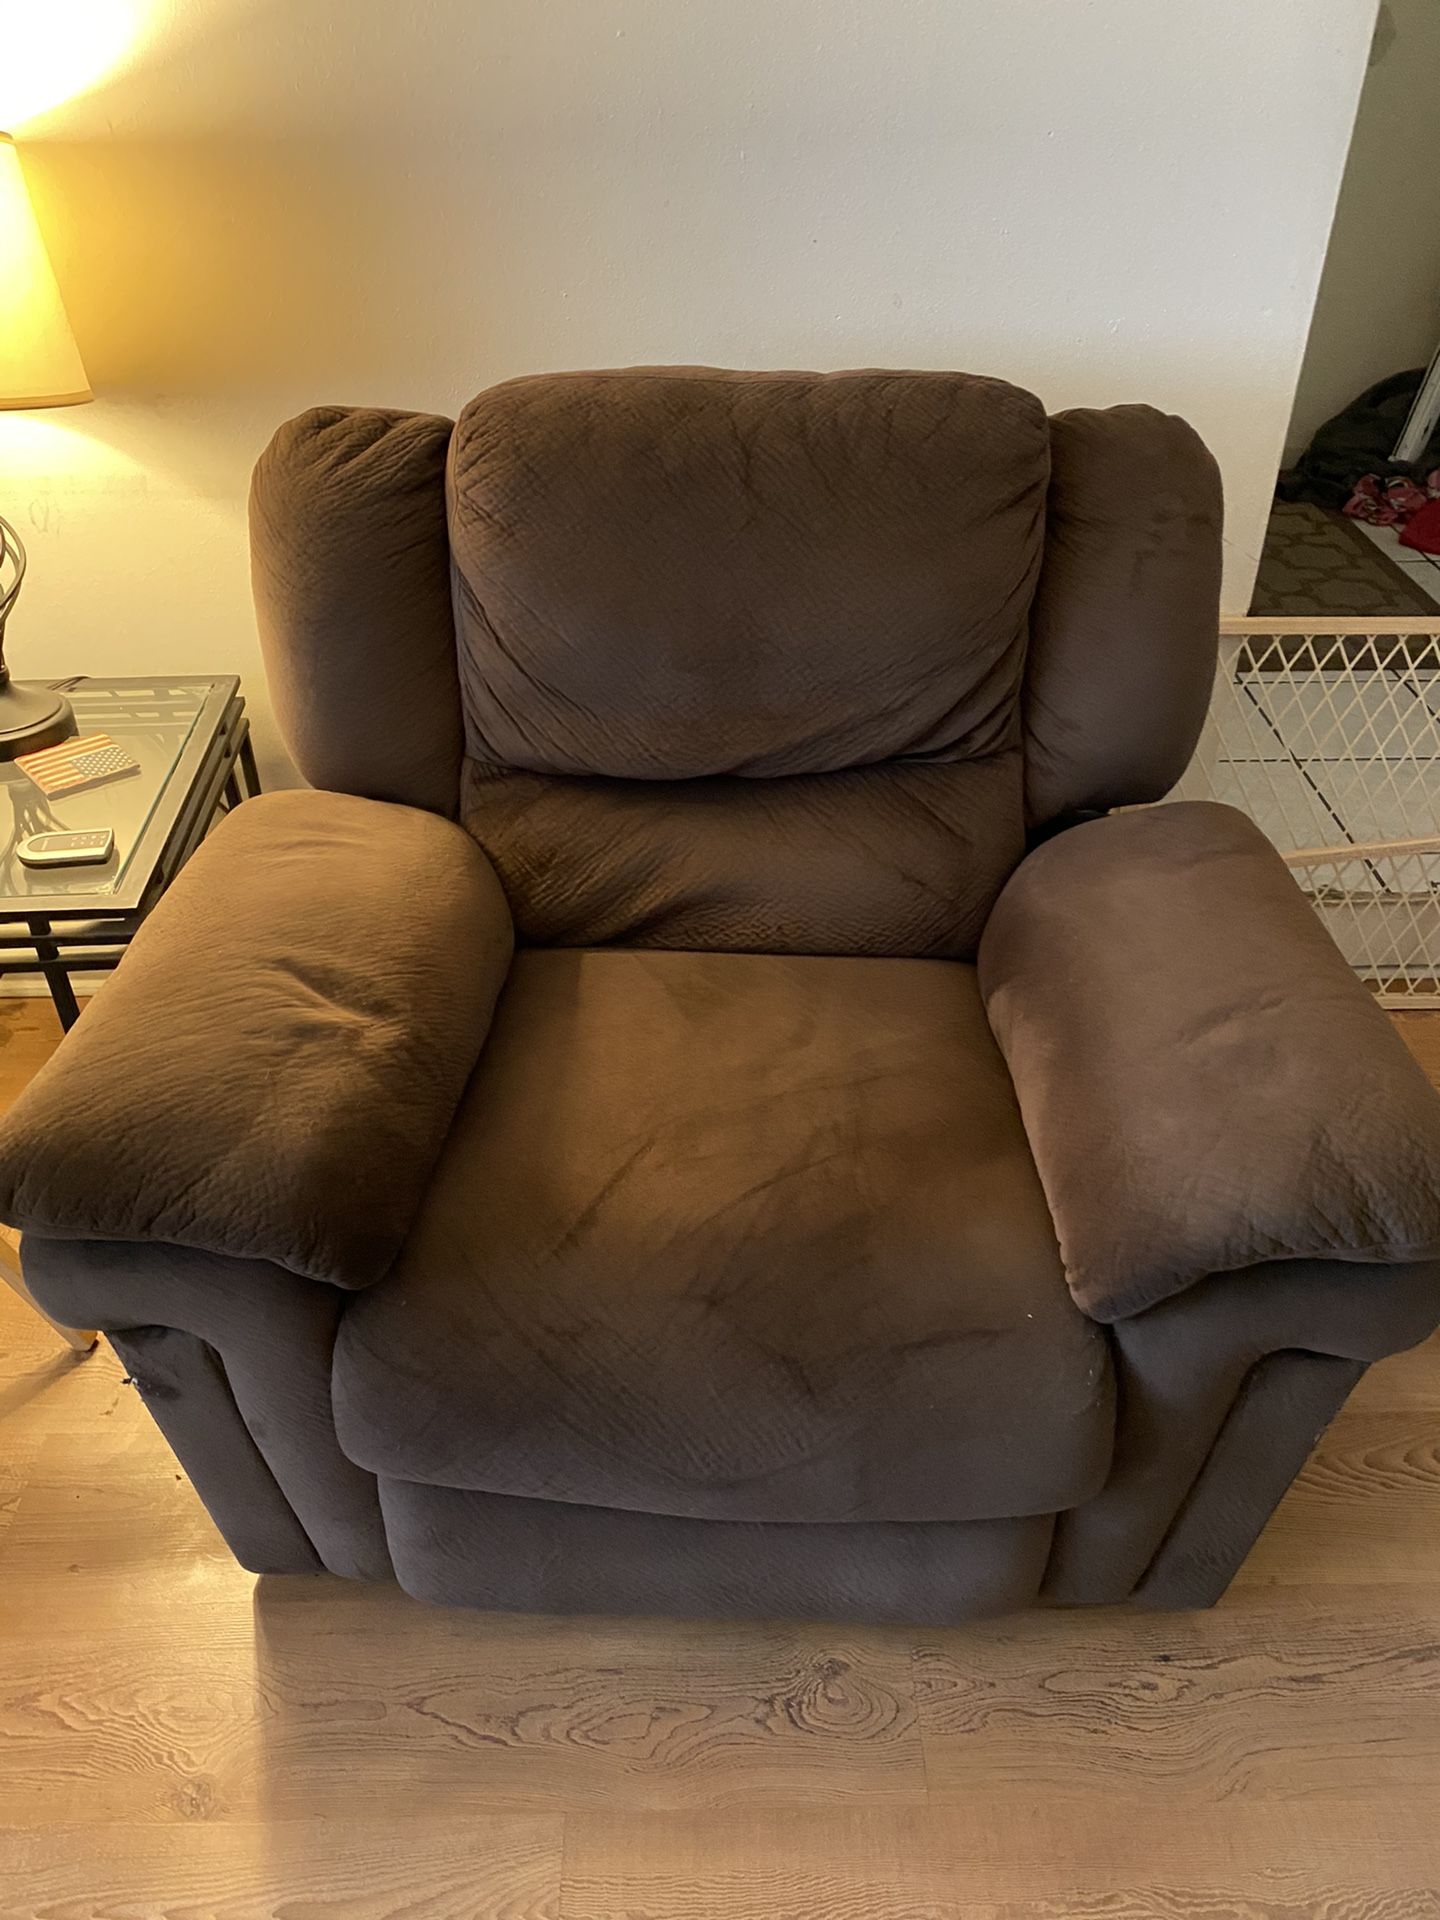 2 RECLINER CHAIRS FREE MUST TAKE BOTH